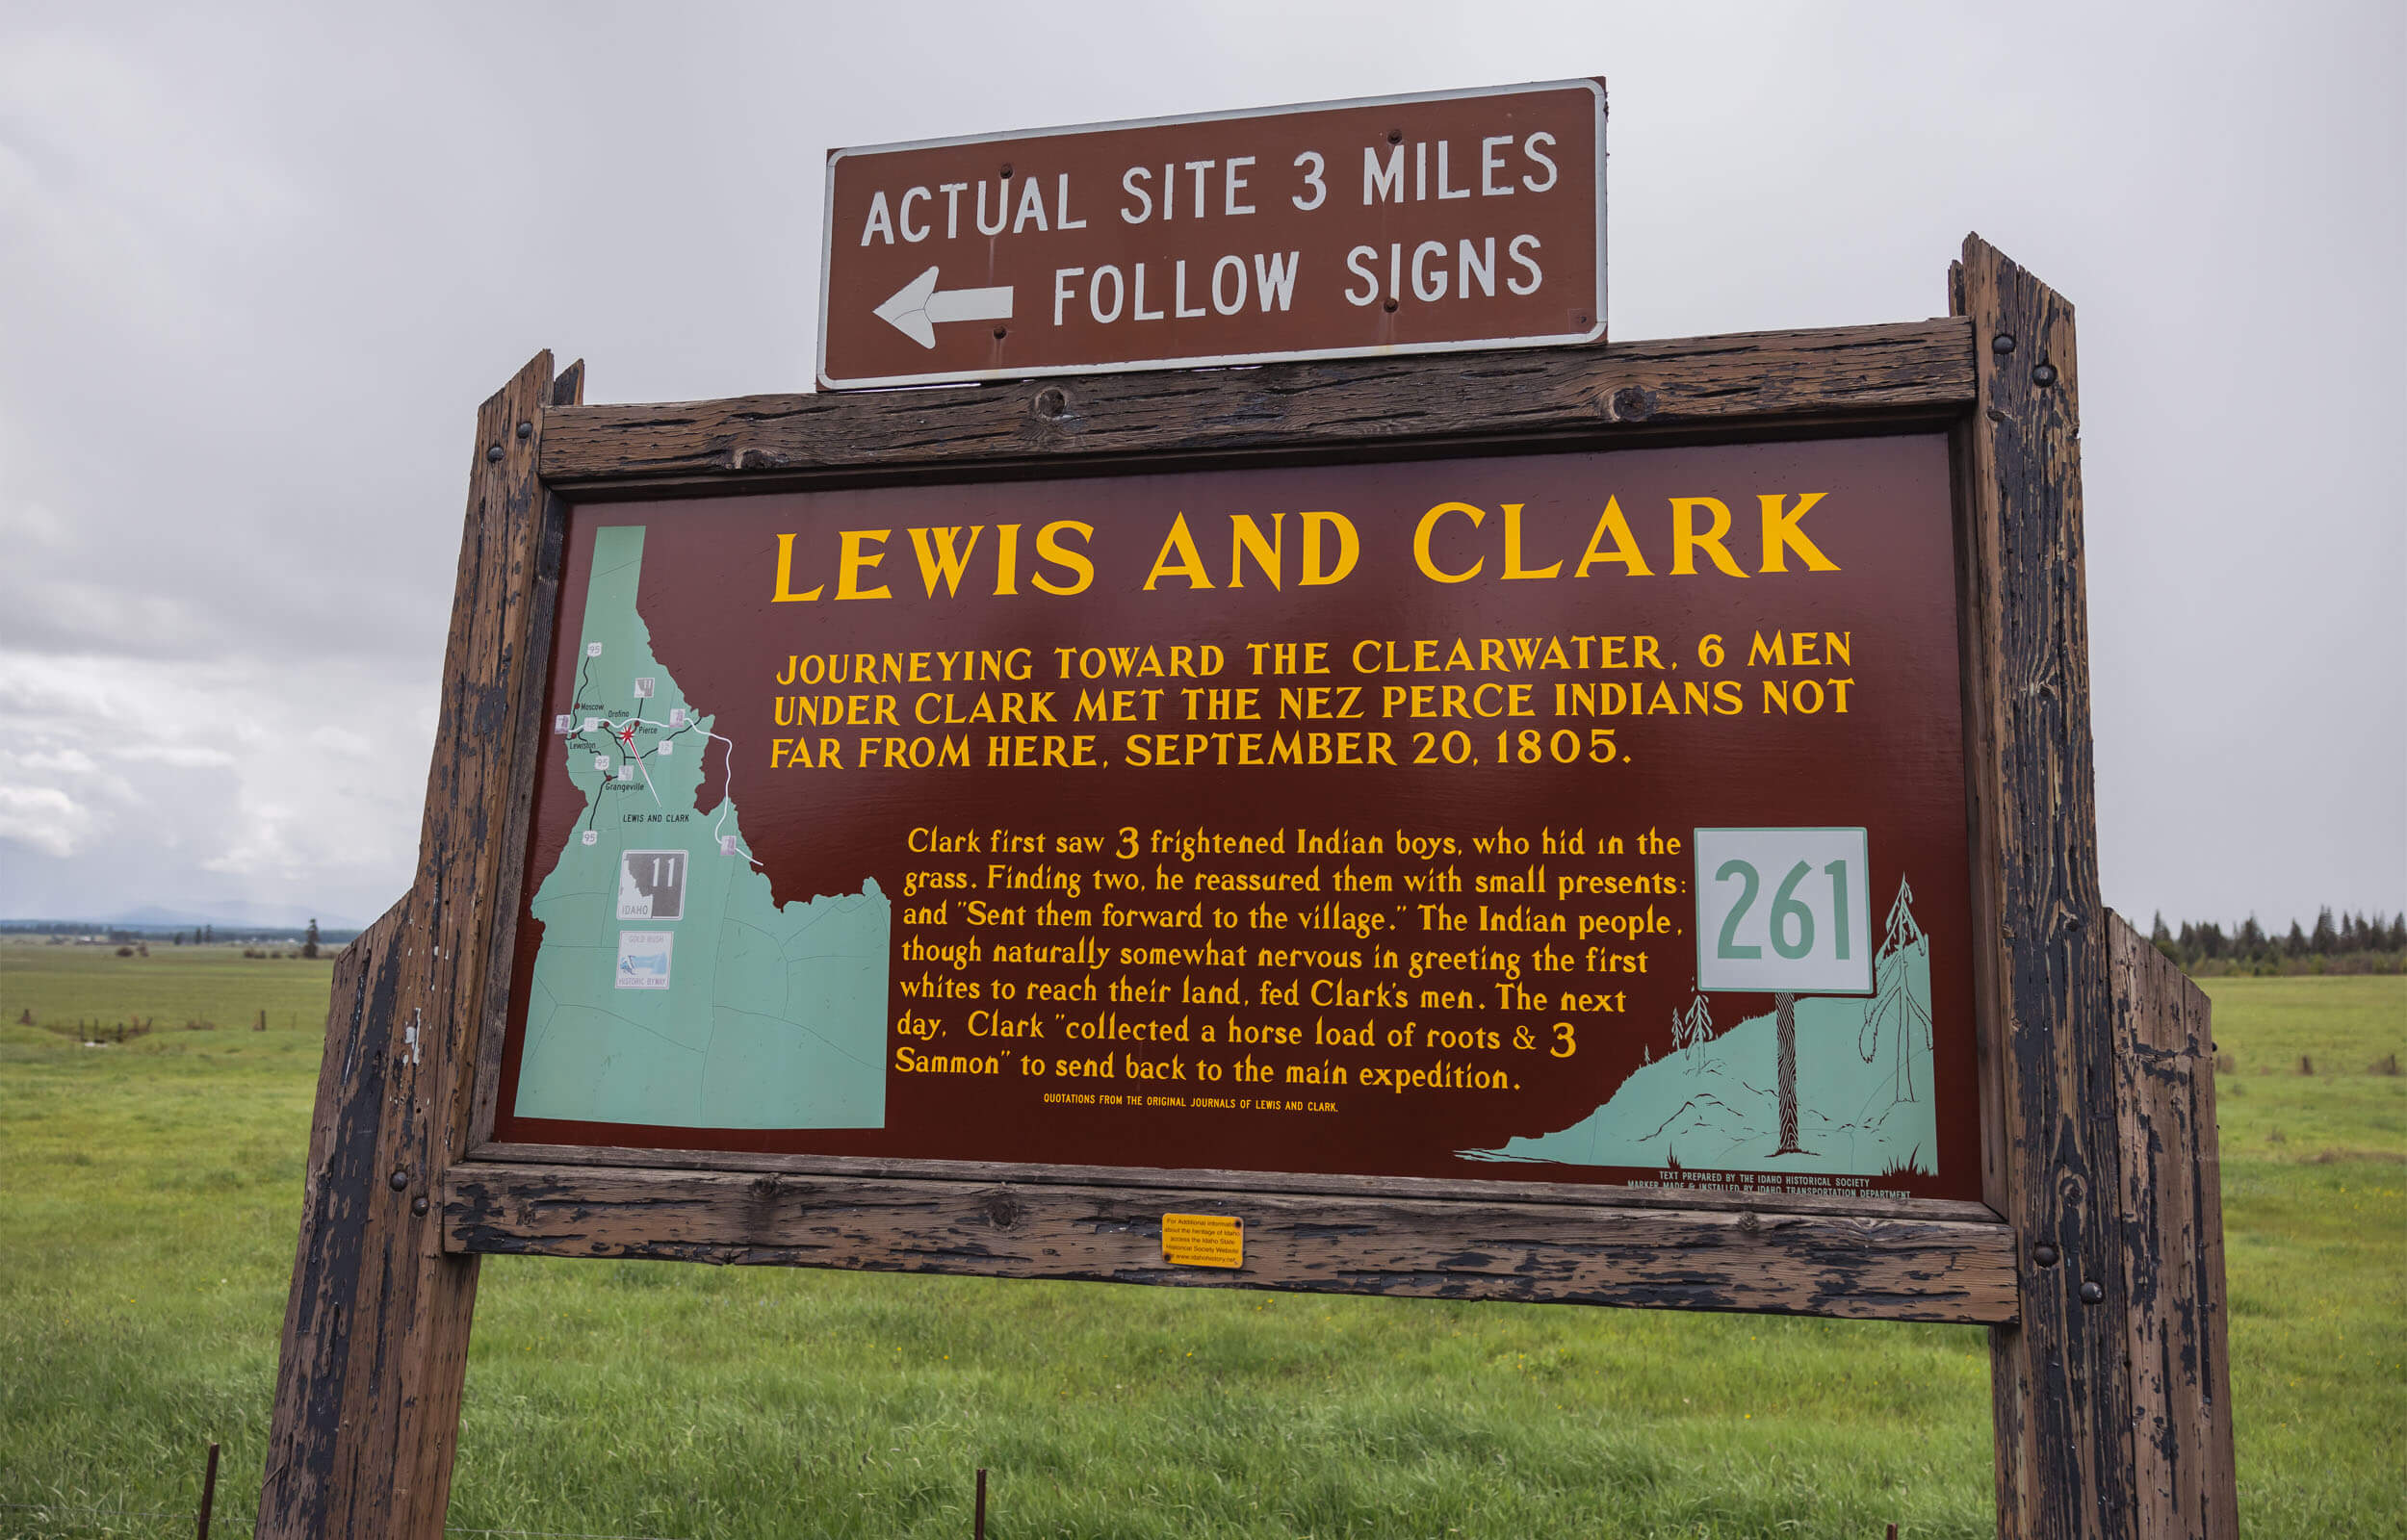 A wooden sign with historical information about the Lewis and Clark Expedition near Weippe.